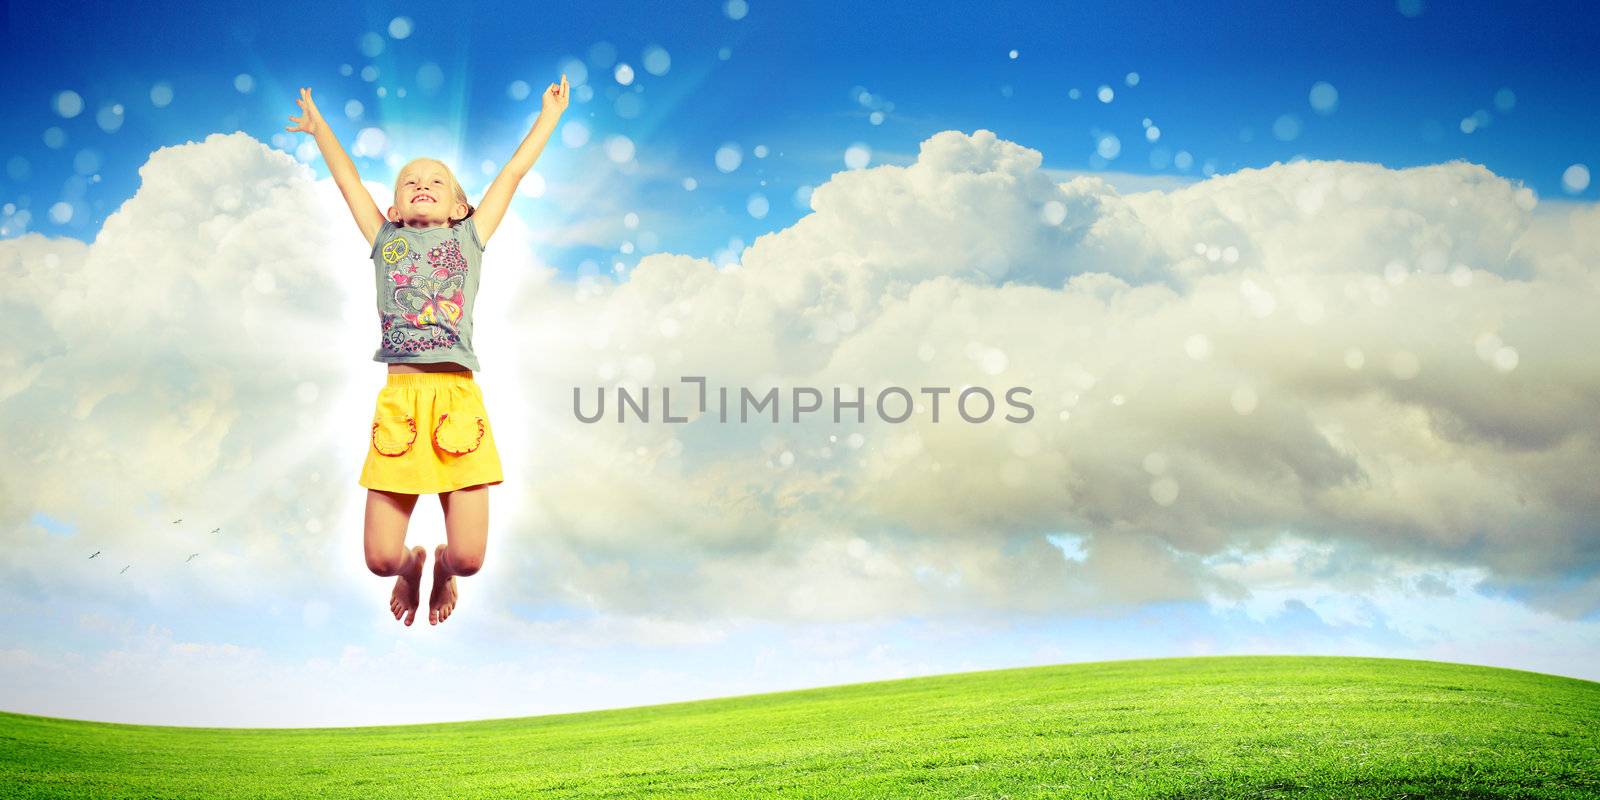 Photo of little girl jumping and raising hands against nature background